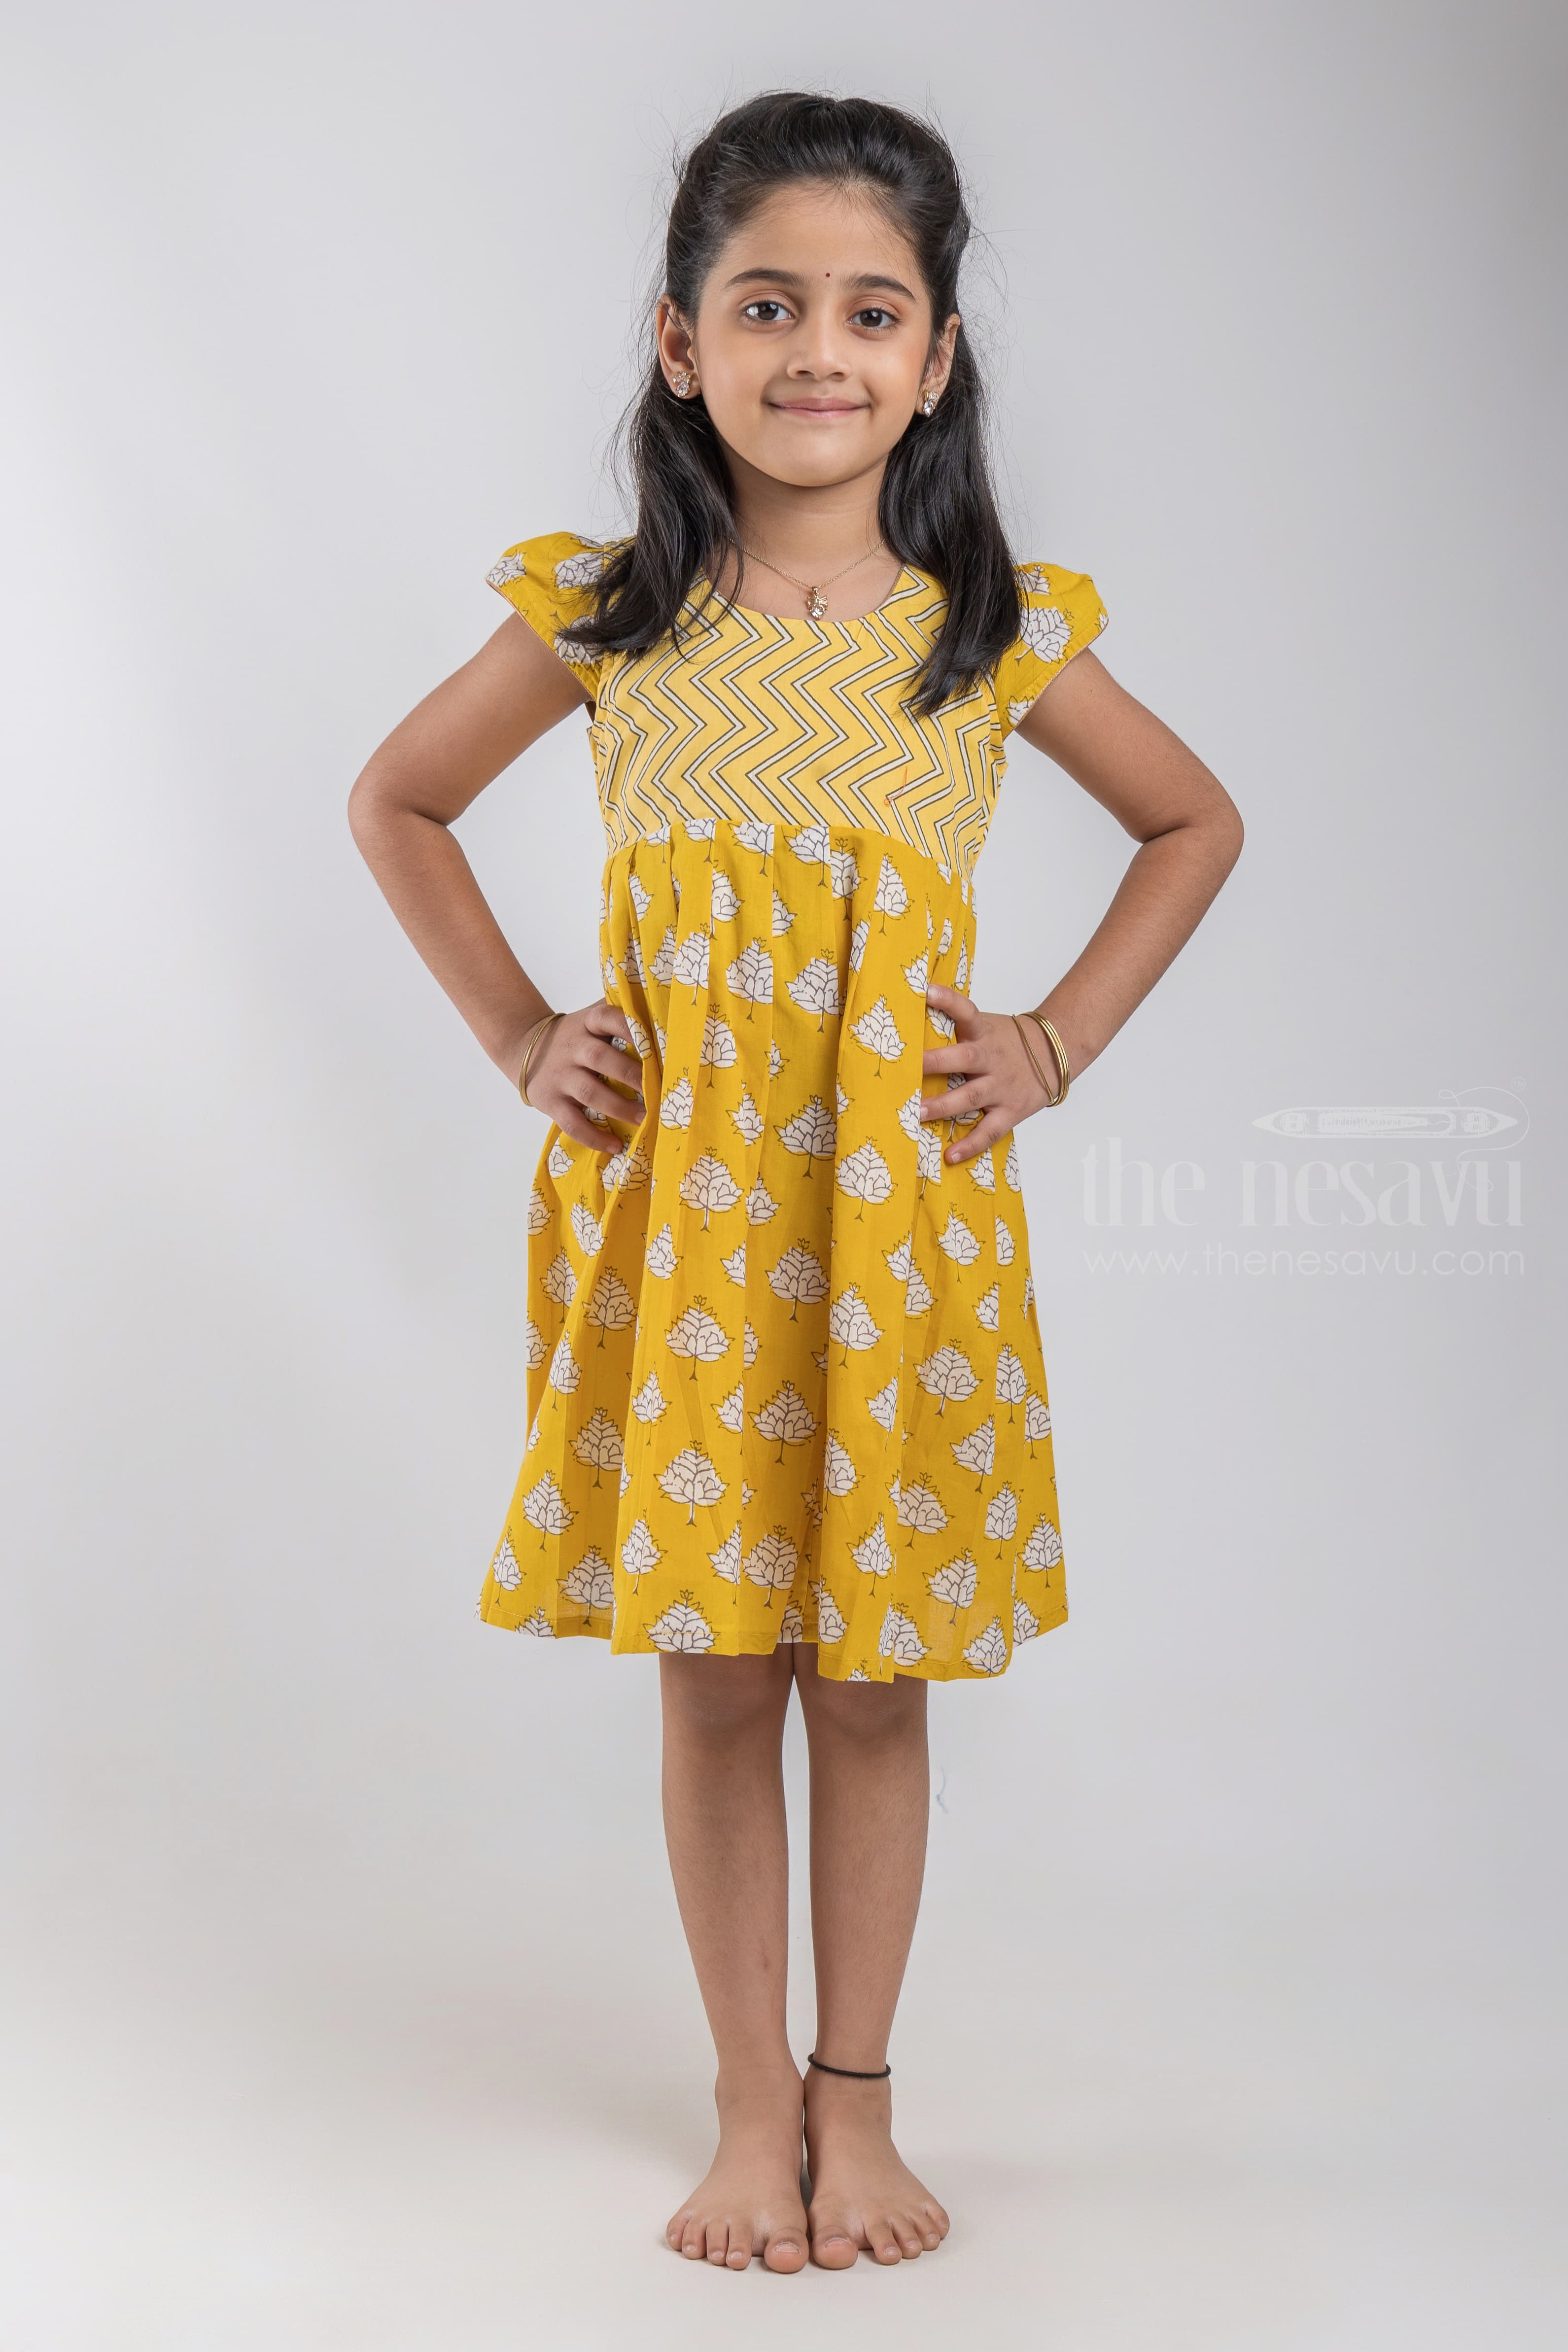 My new American Girl Dress Design | Printable Doll Clothes